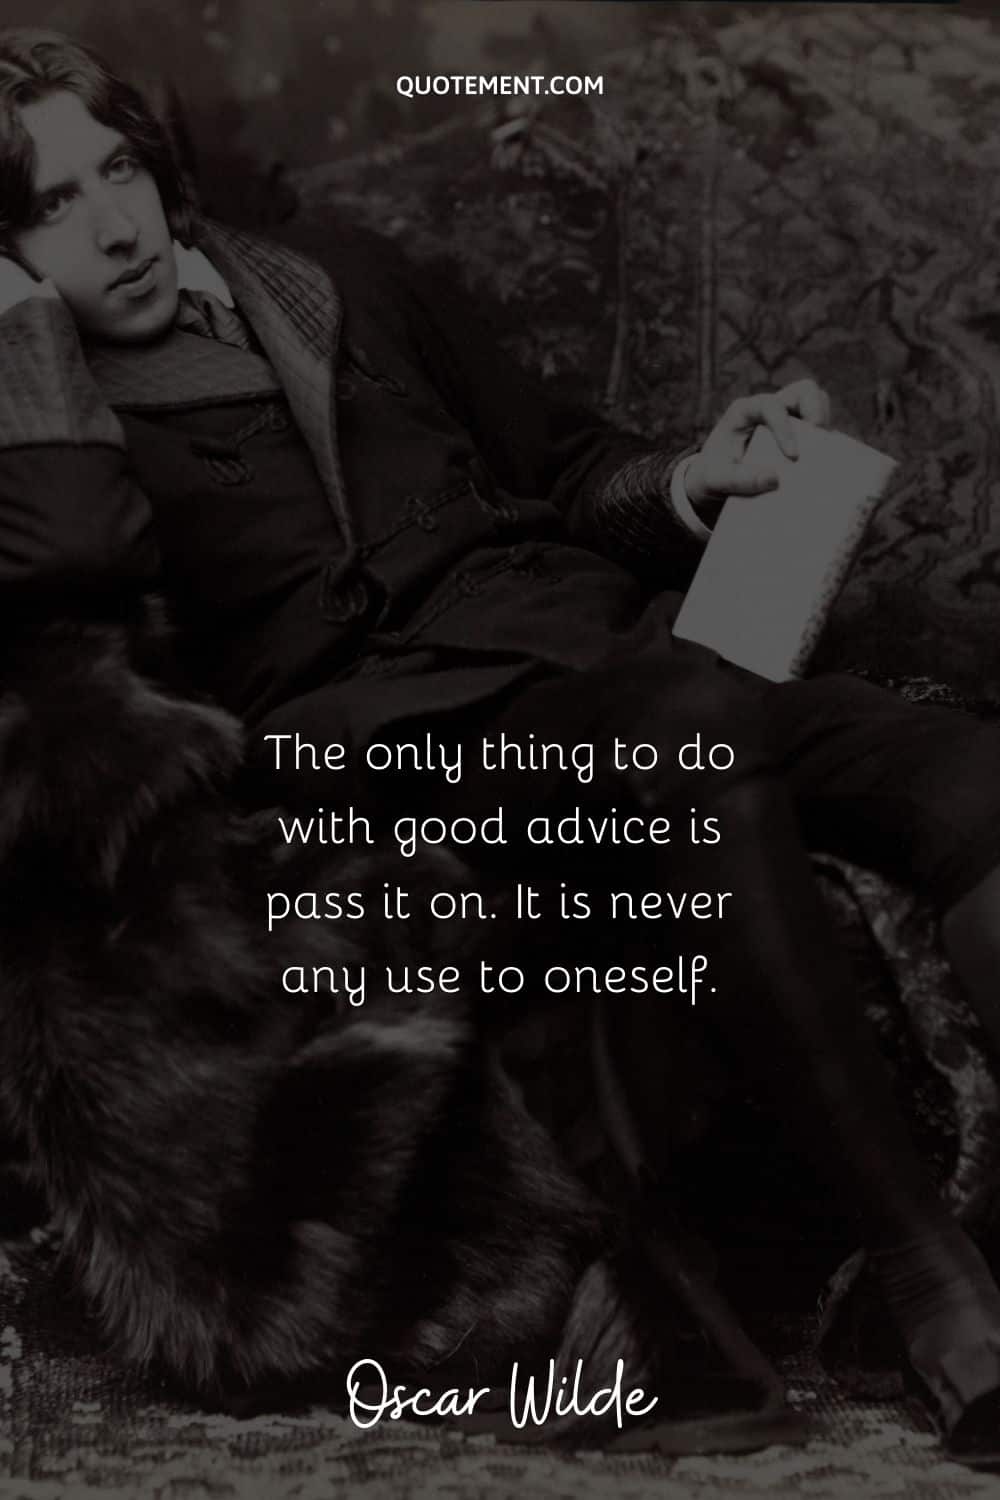 “The only thing to do with good advice is pass it on. It is never any use to oneself.” ― Oscar Wilde (An Ideal Husband)